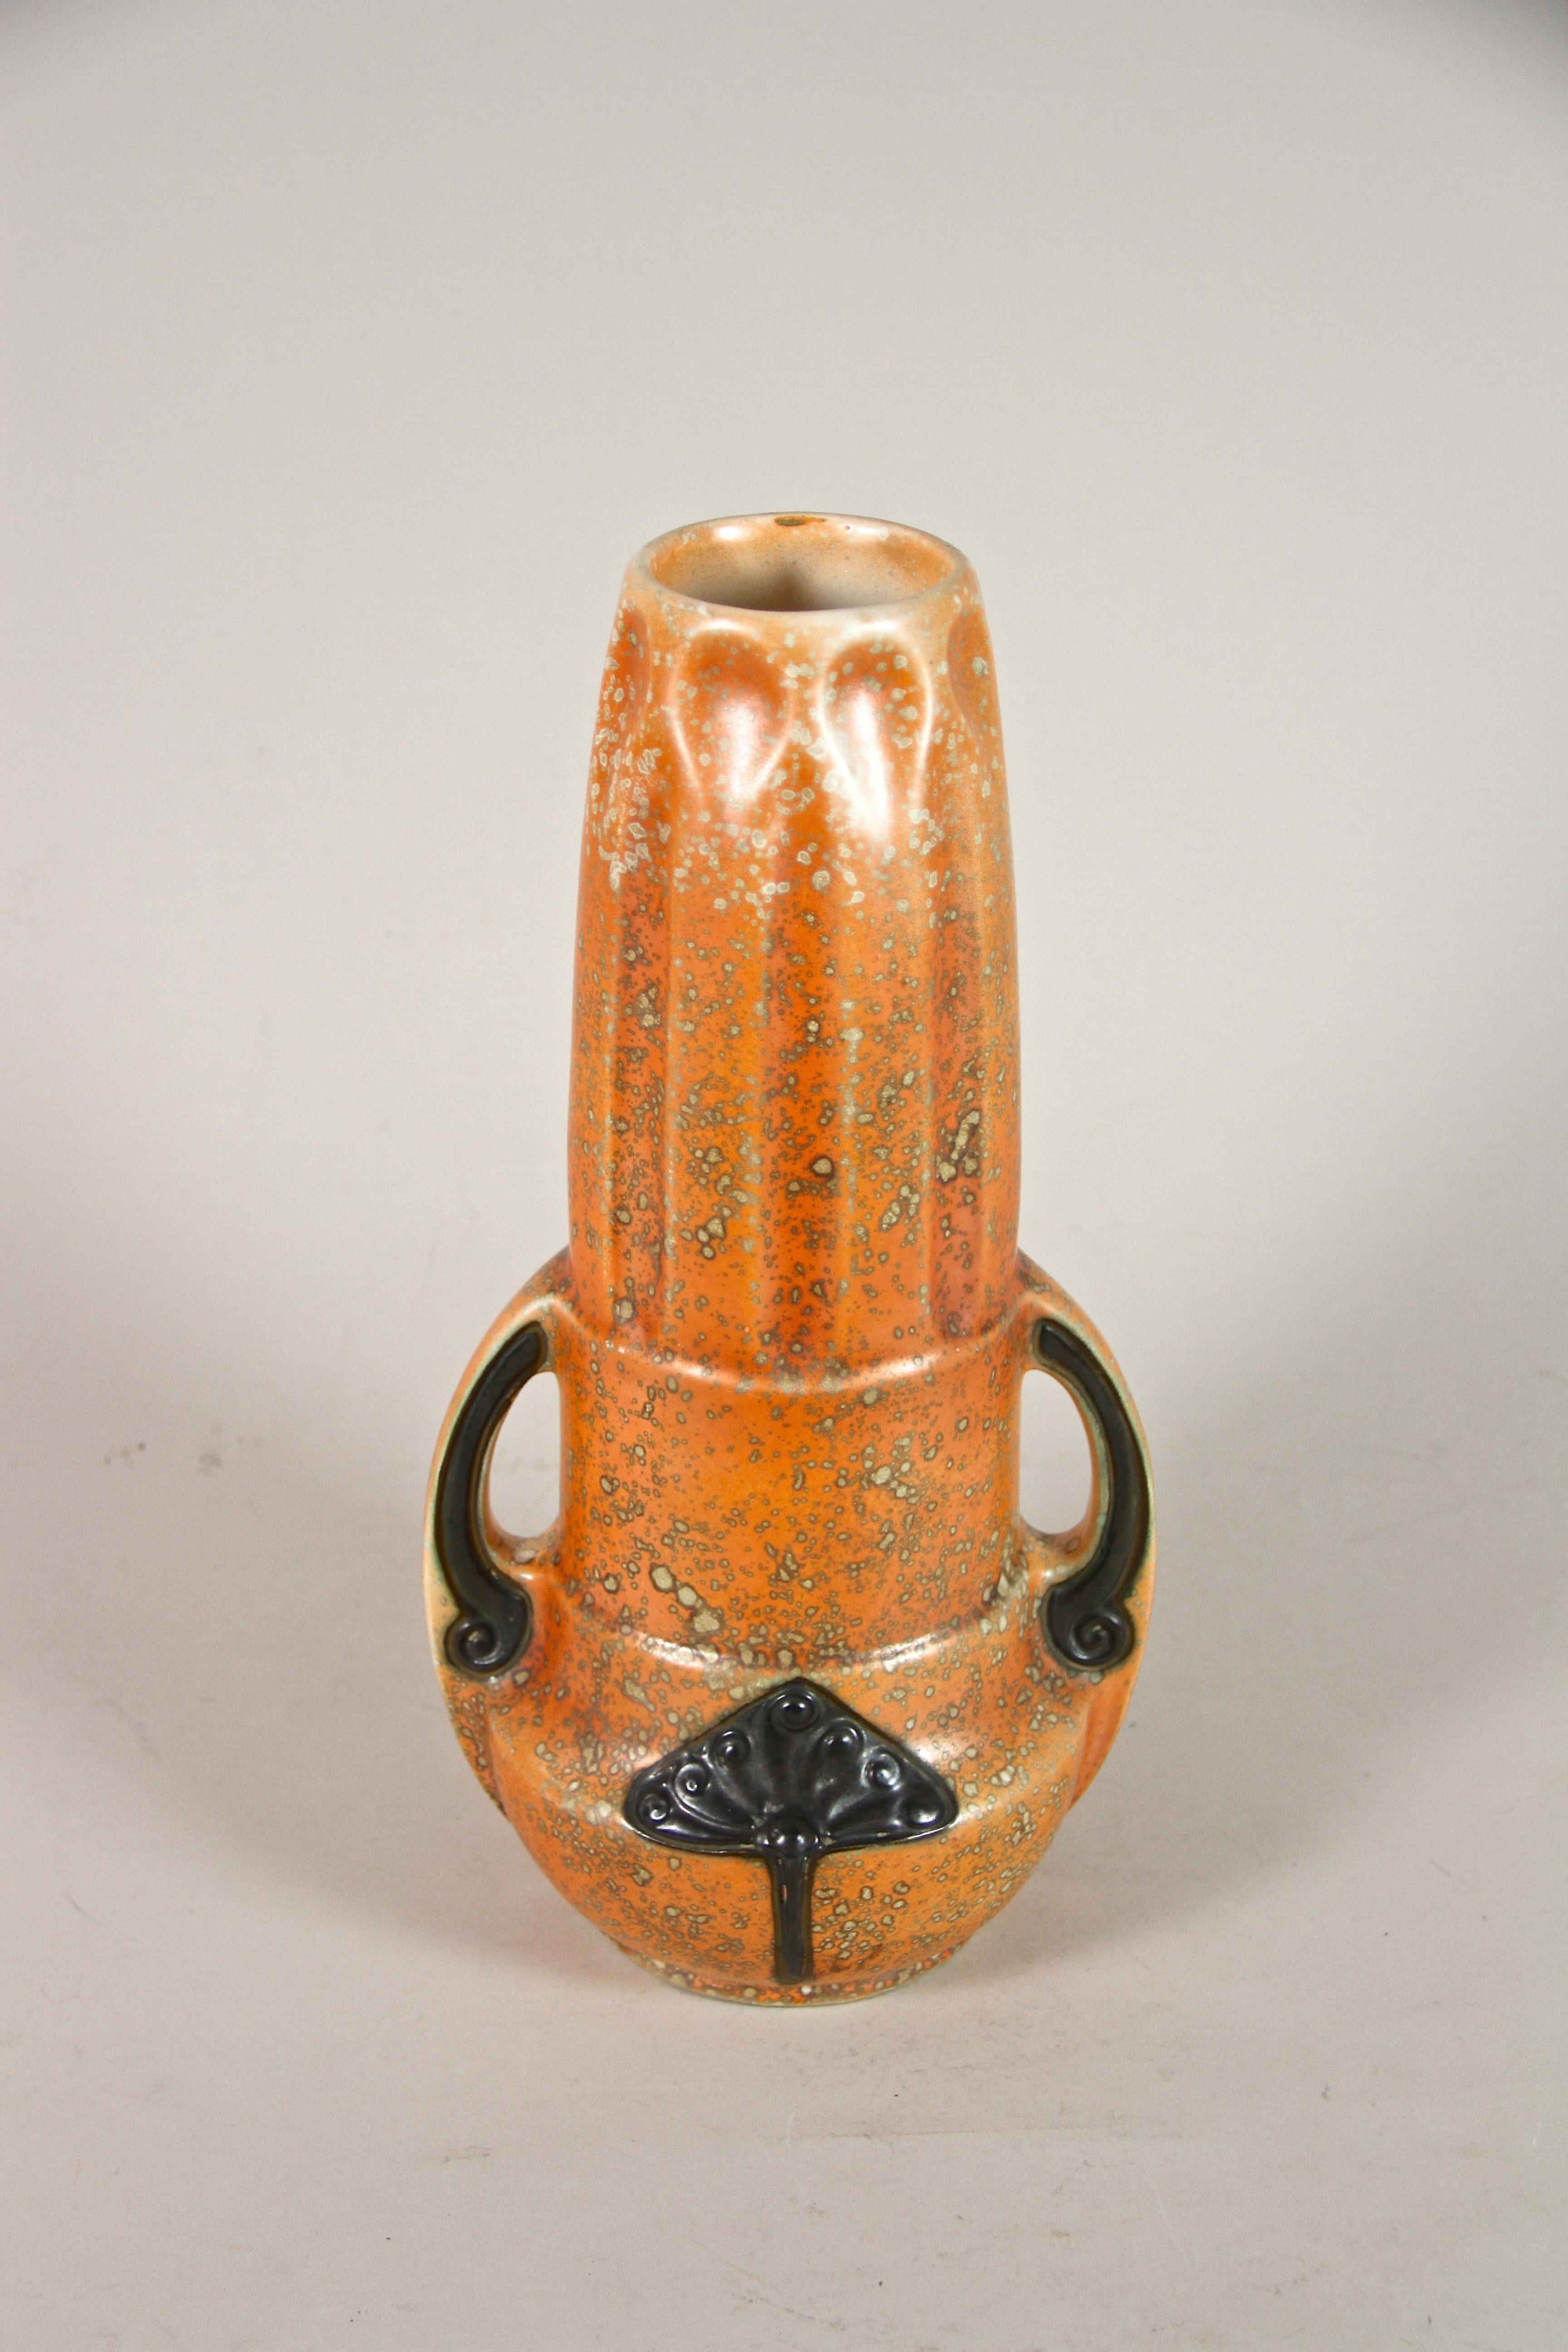 Out of the ordinary orange Art Nouveau Majolica Vase by Amphora from the early Art Deco period in the Czech Republic around 1920. The amazing shaped body shows a fantastic design with beautiful orange coloration adorned by extraordinary looking